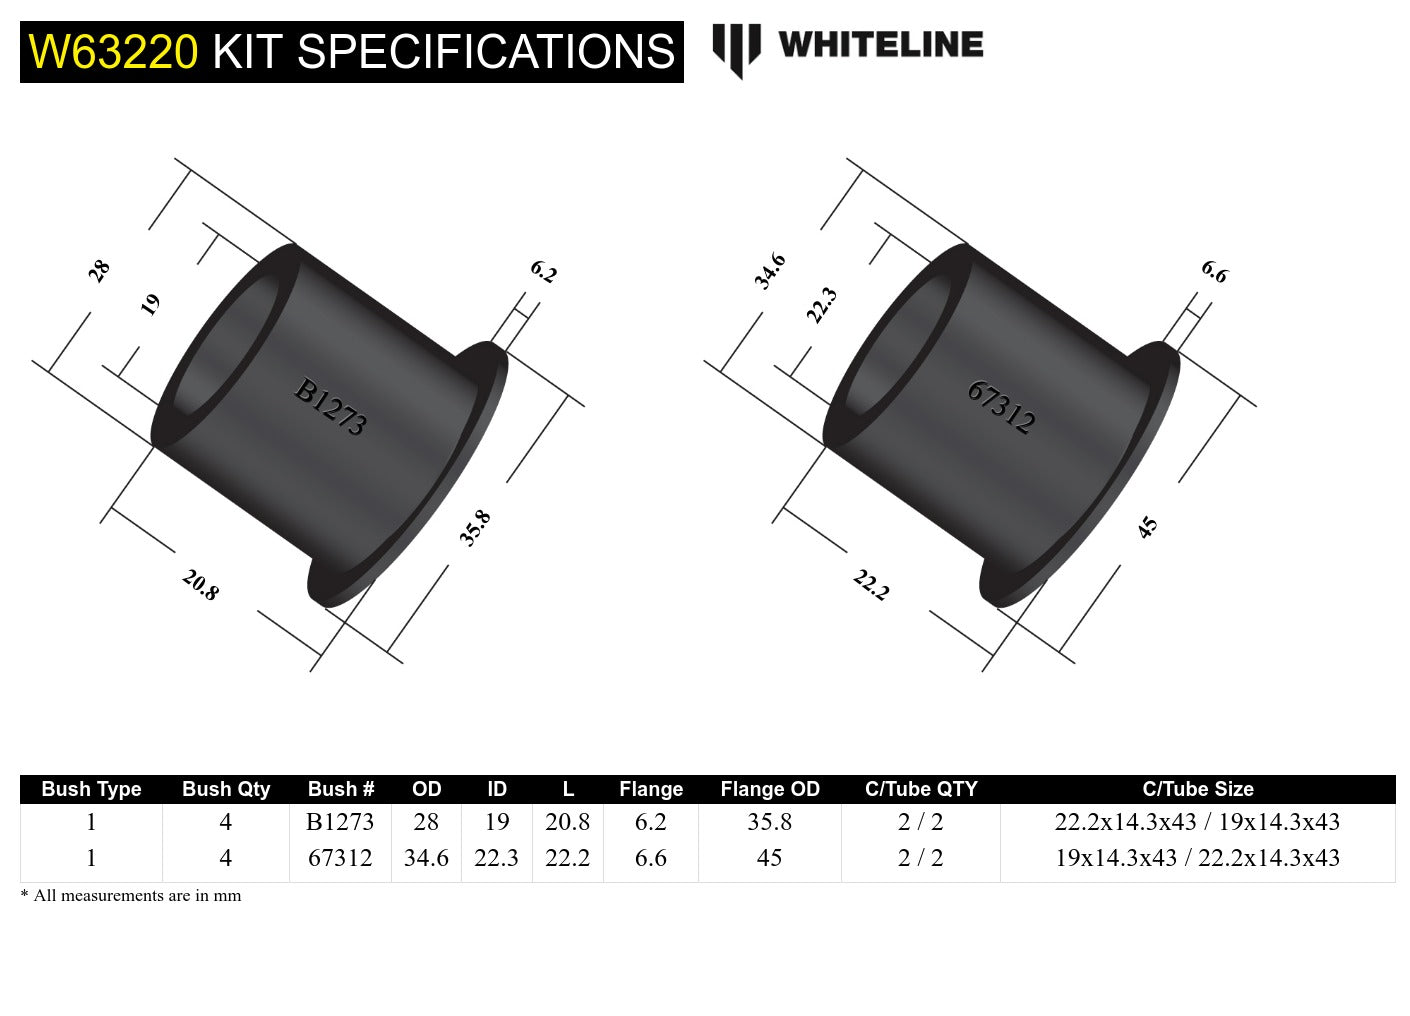 Rear Control arm - lower front bushing